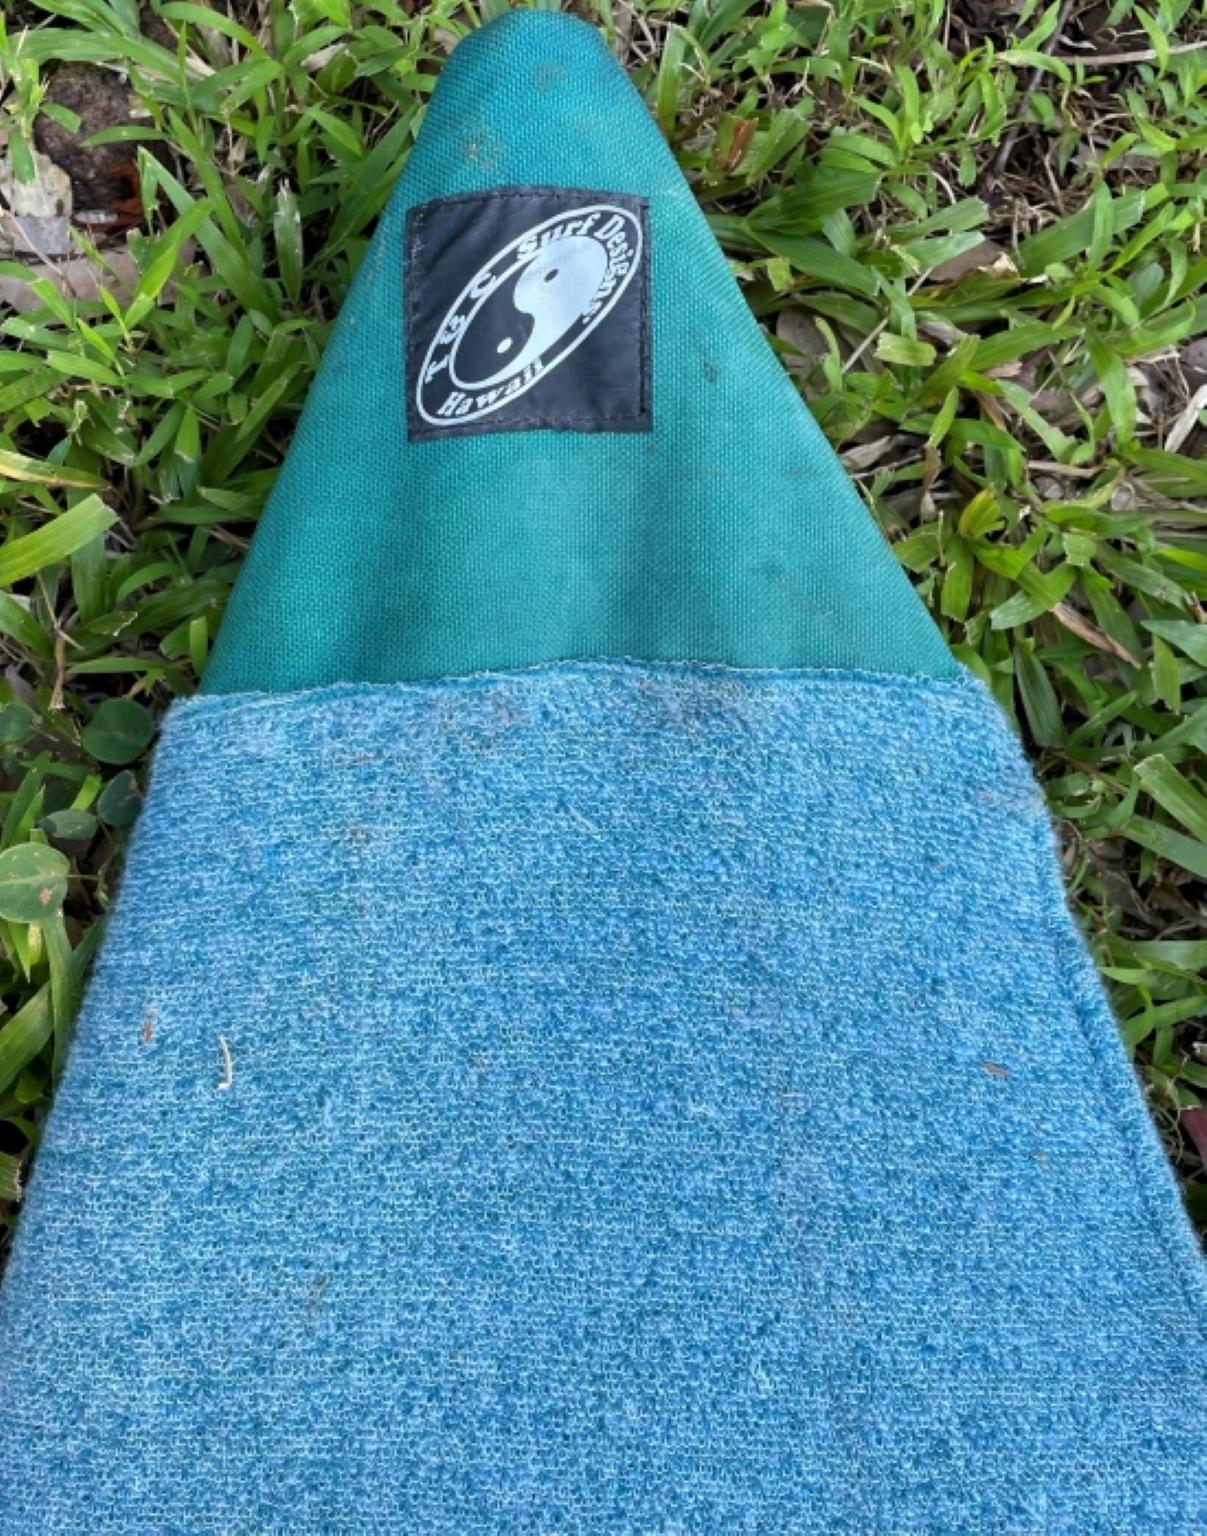 Fiberglass 1990s Vintage Town & Country shortboard by Ned McMann For Sale